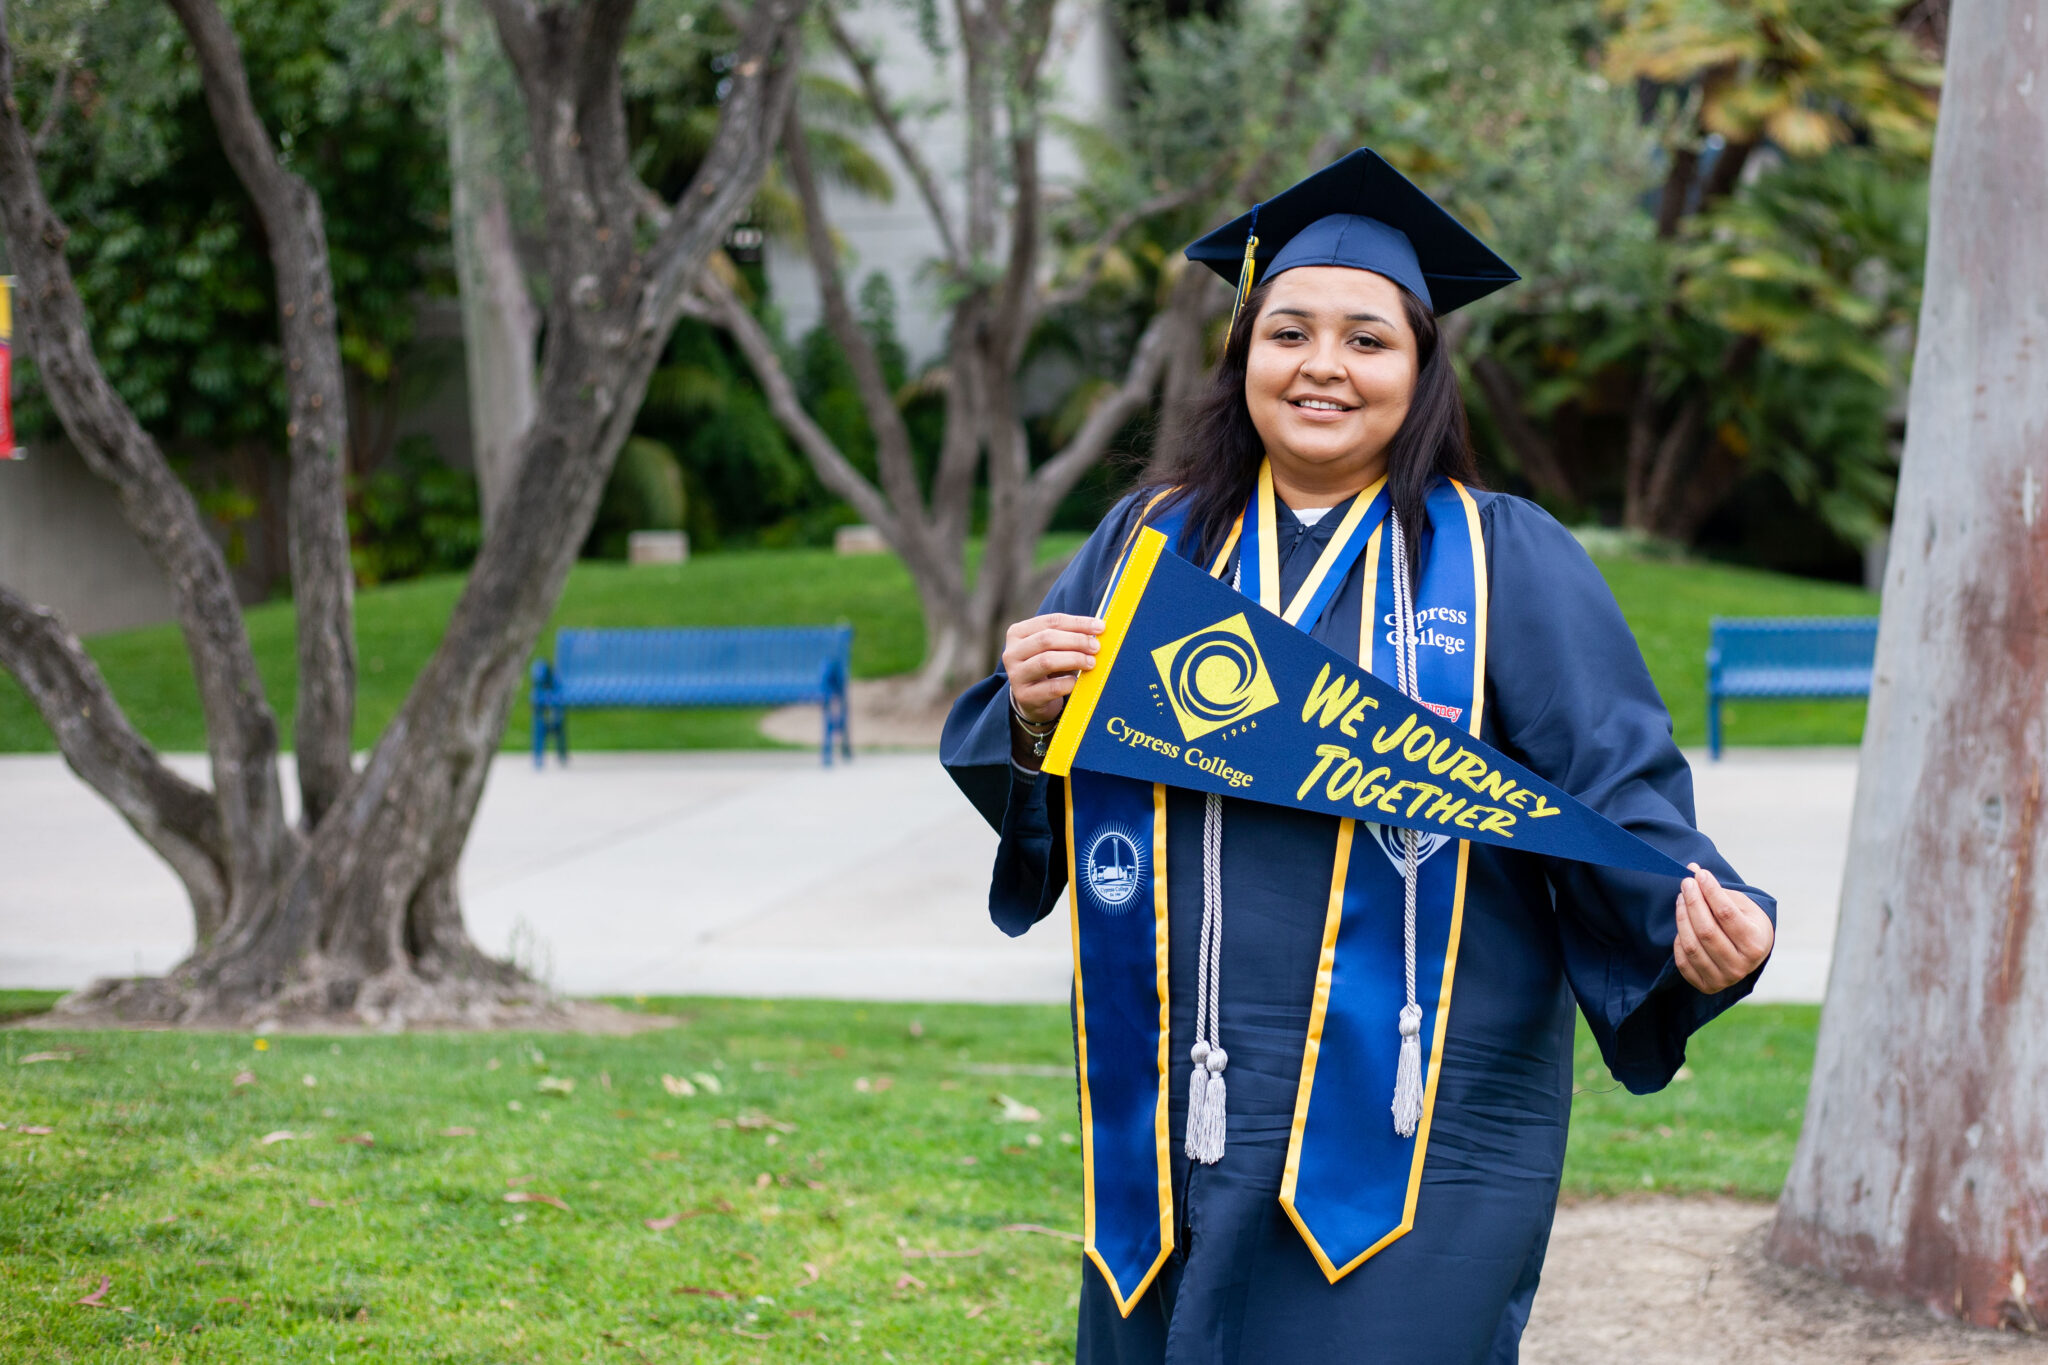 Portrait of Azusena Zamarripa, the 2023 Presidential Scholar of Distinction for the We Journey Together pathway, wearing regalia and holding a Cypress College "We Journey Together" pennant with CCCPLX and greenery in the background.